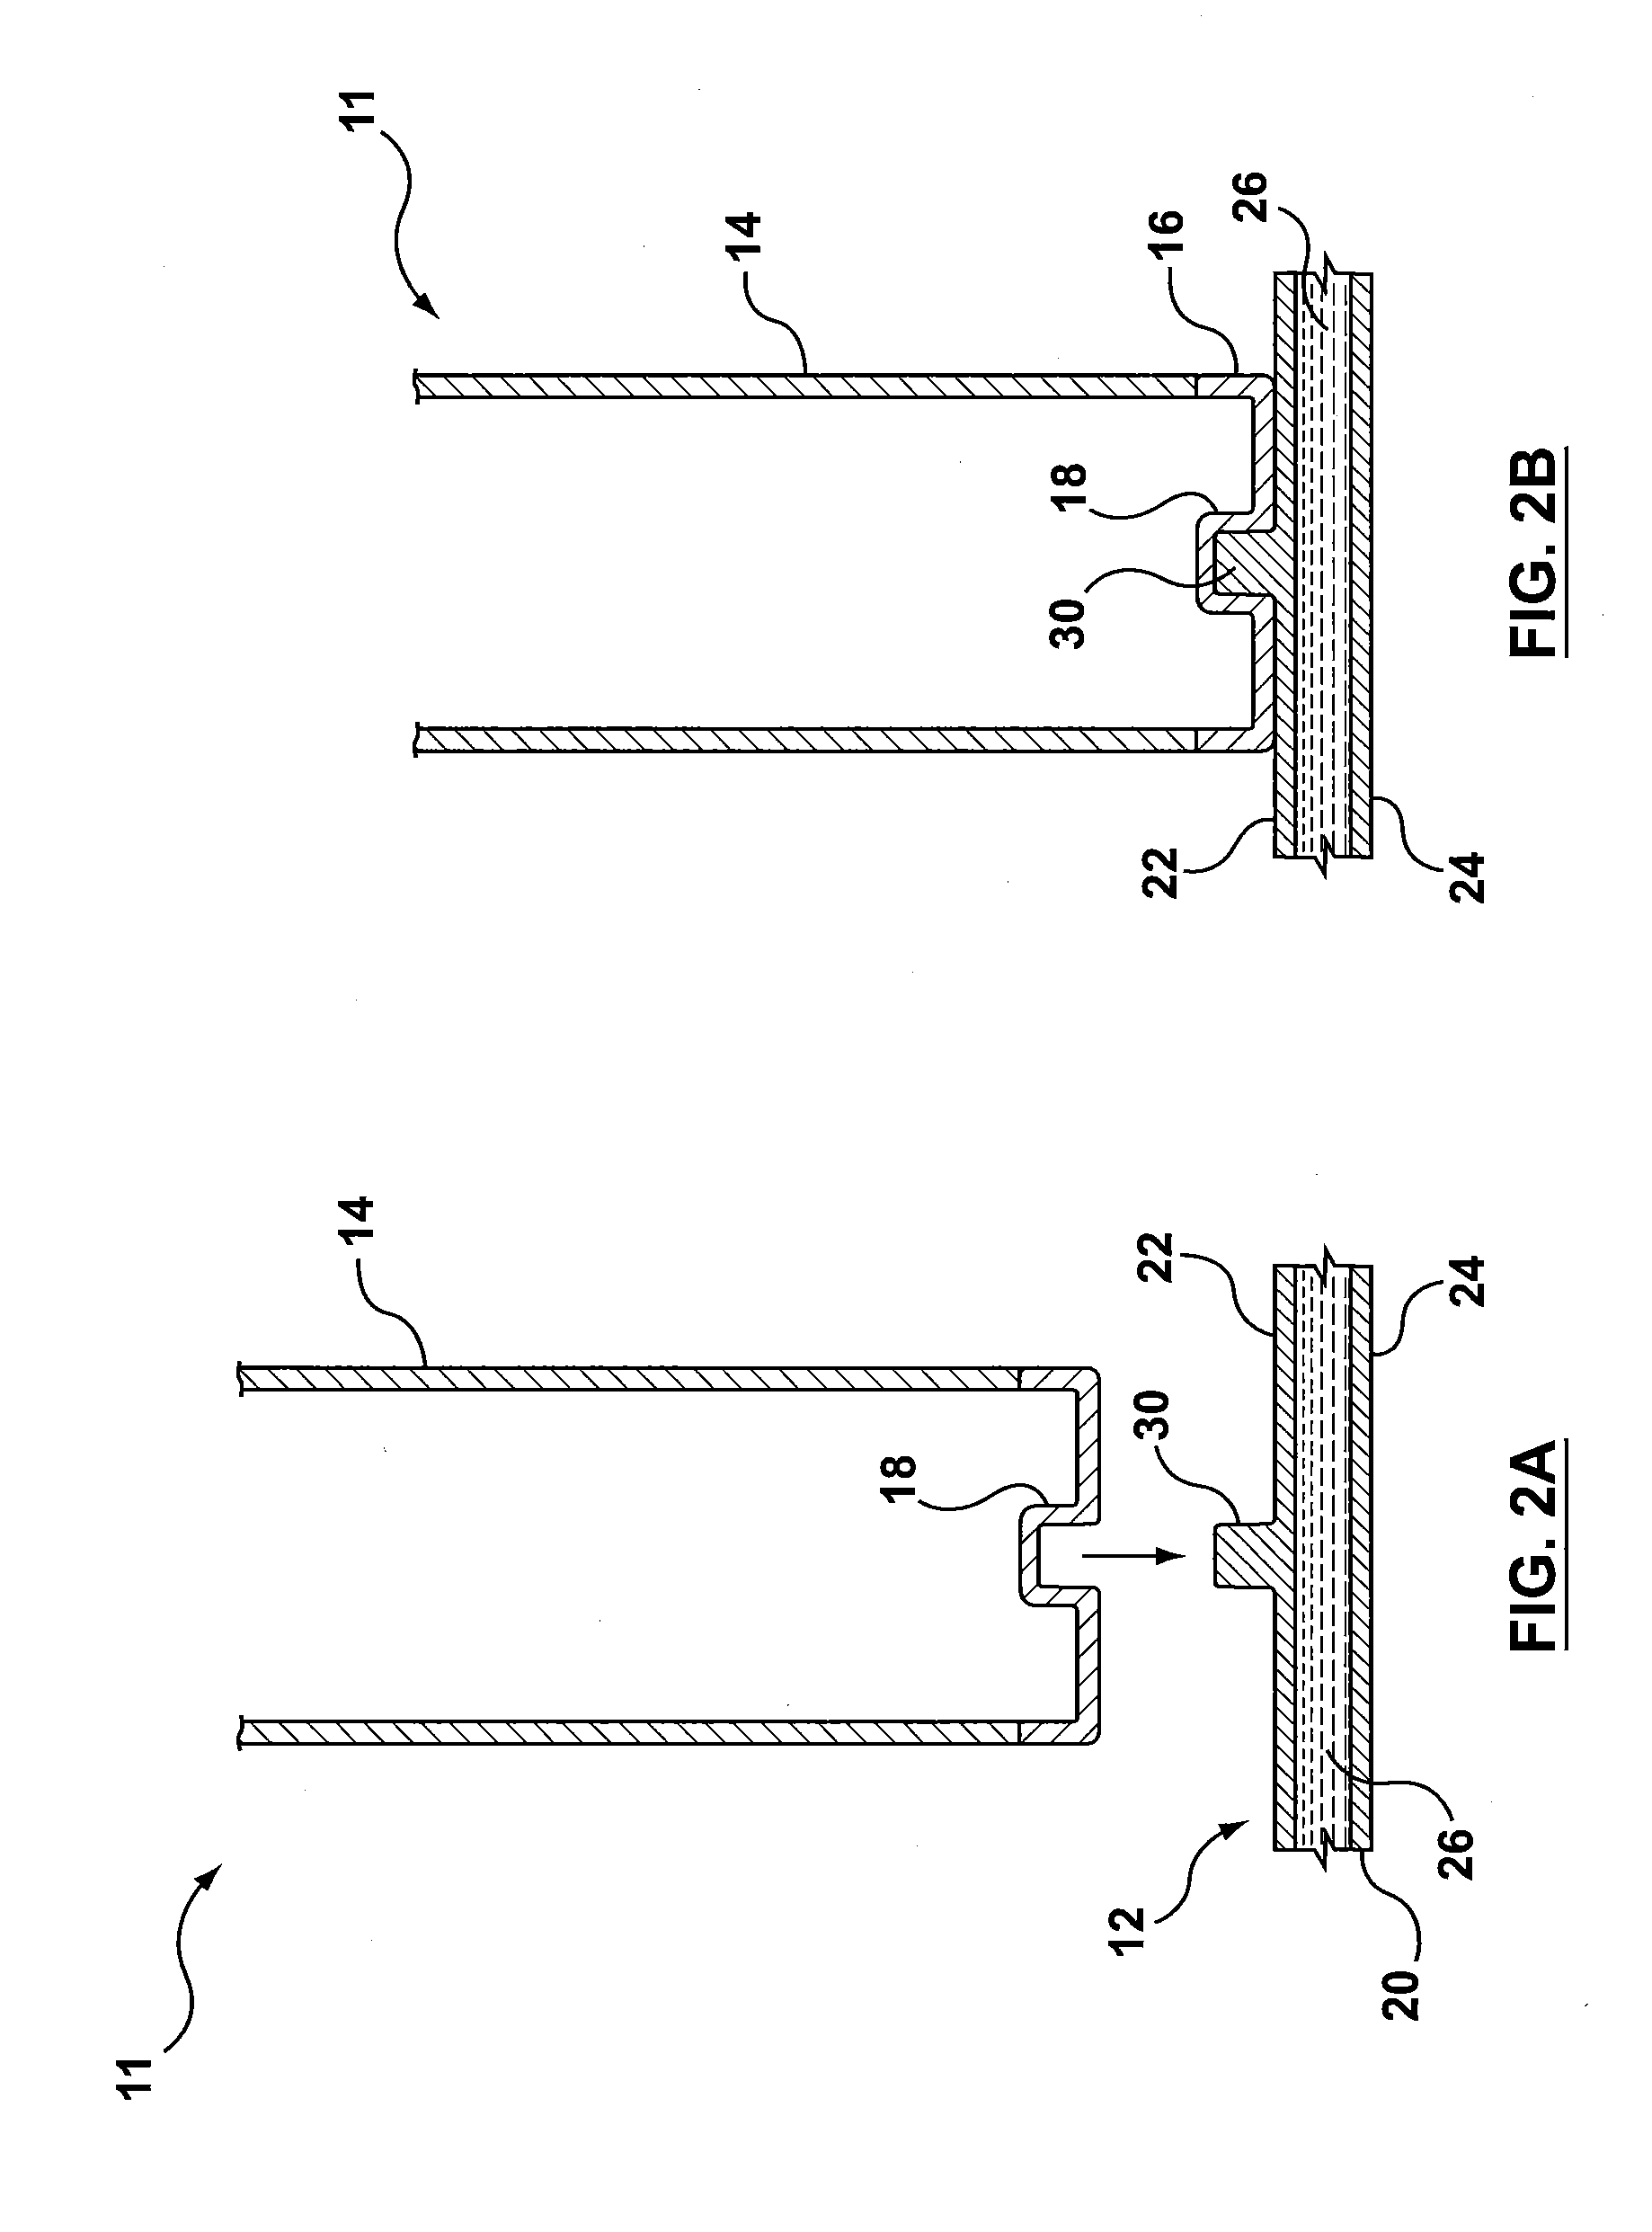 Heat Exchanger and Battery Unit Structure for Cooling Thermally Conductive Batteries